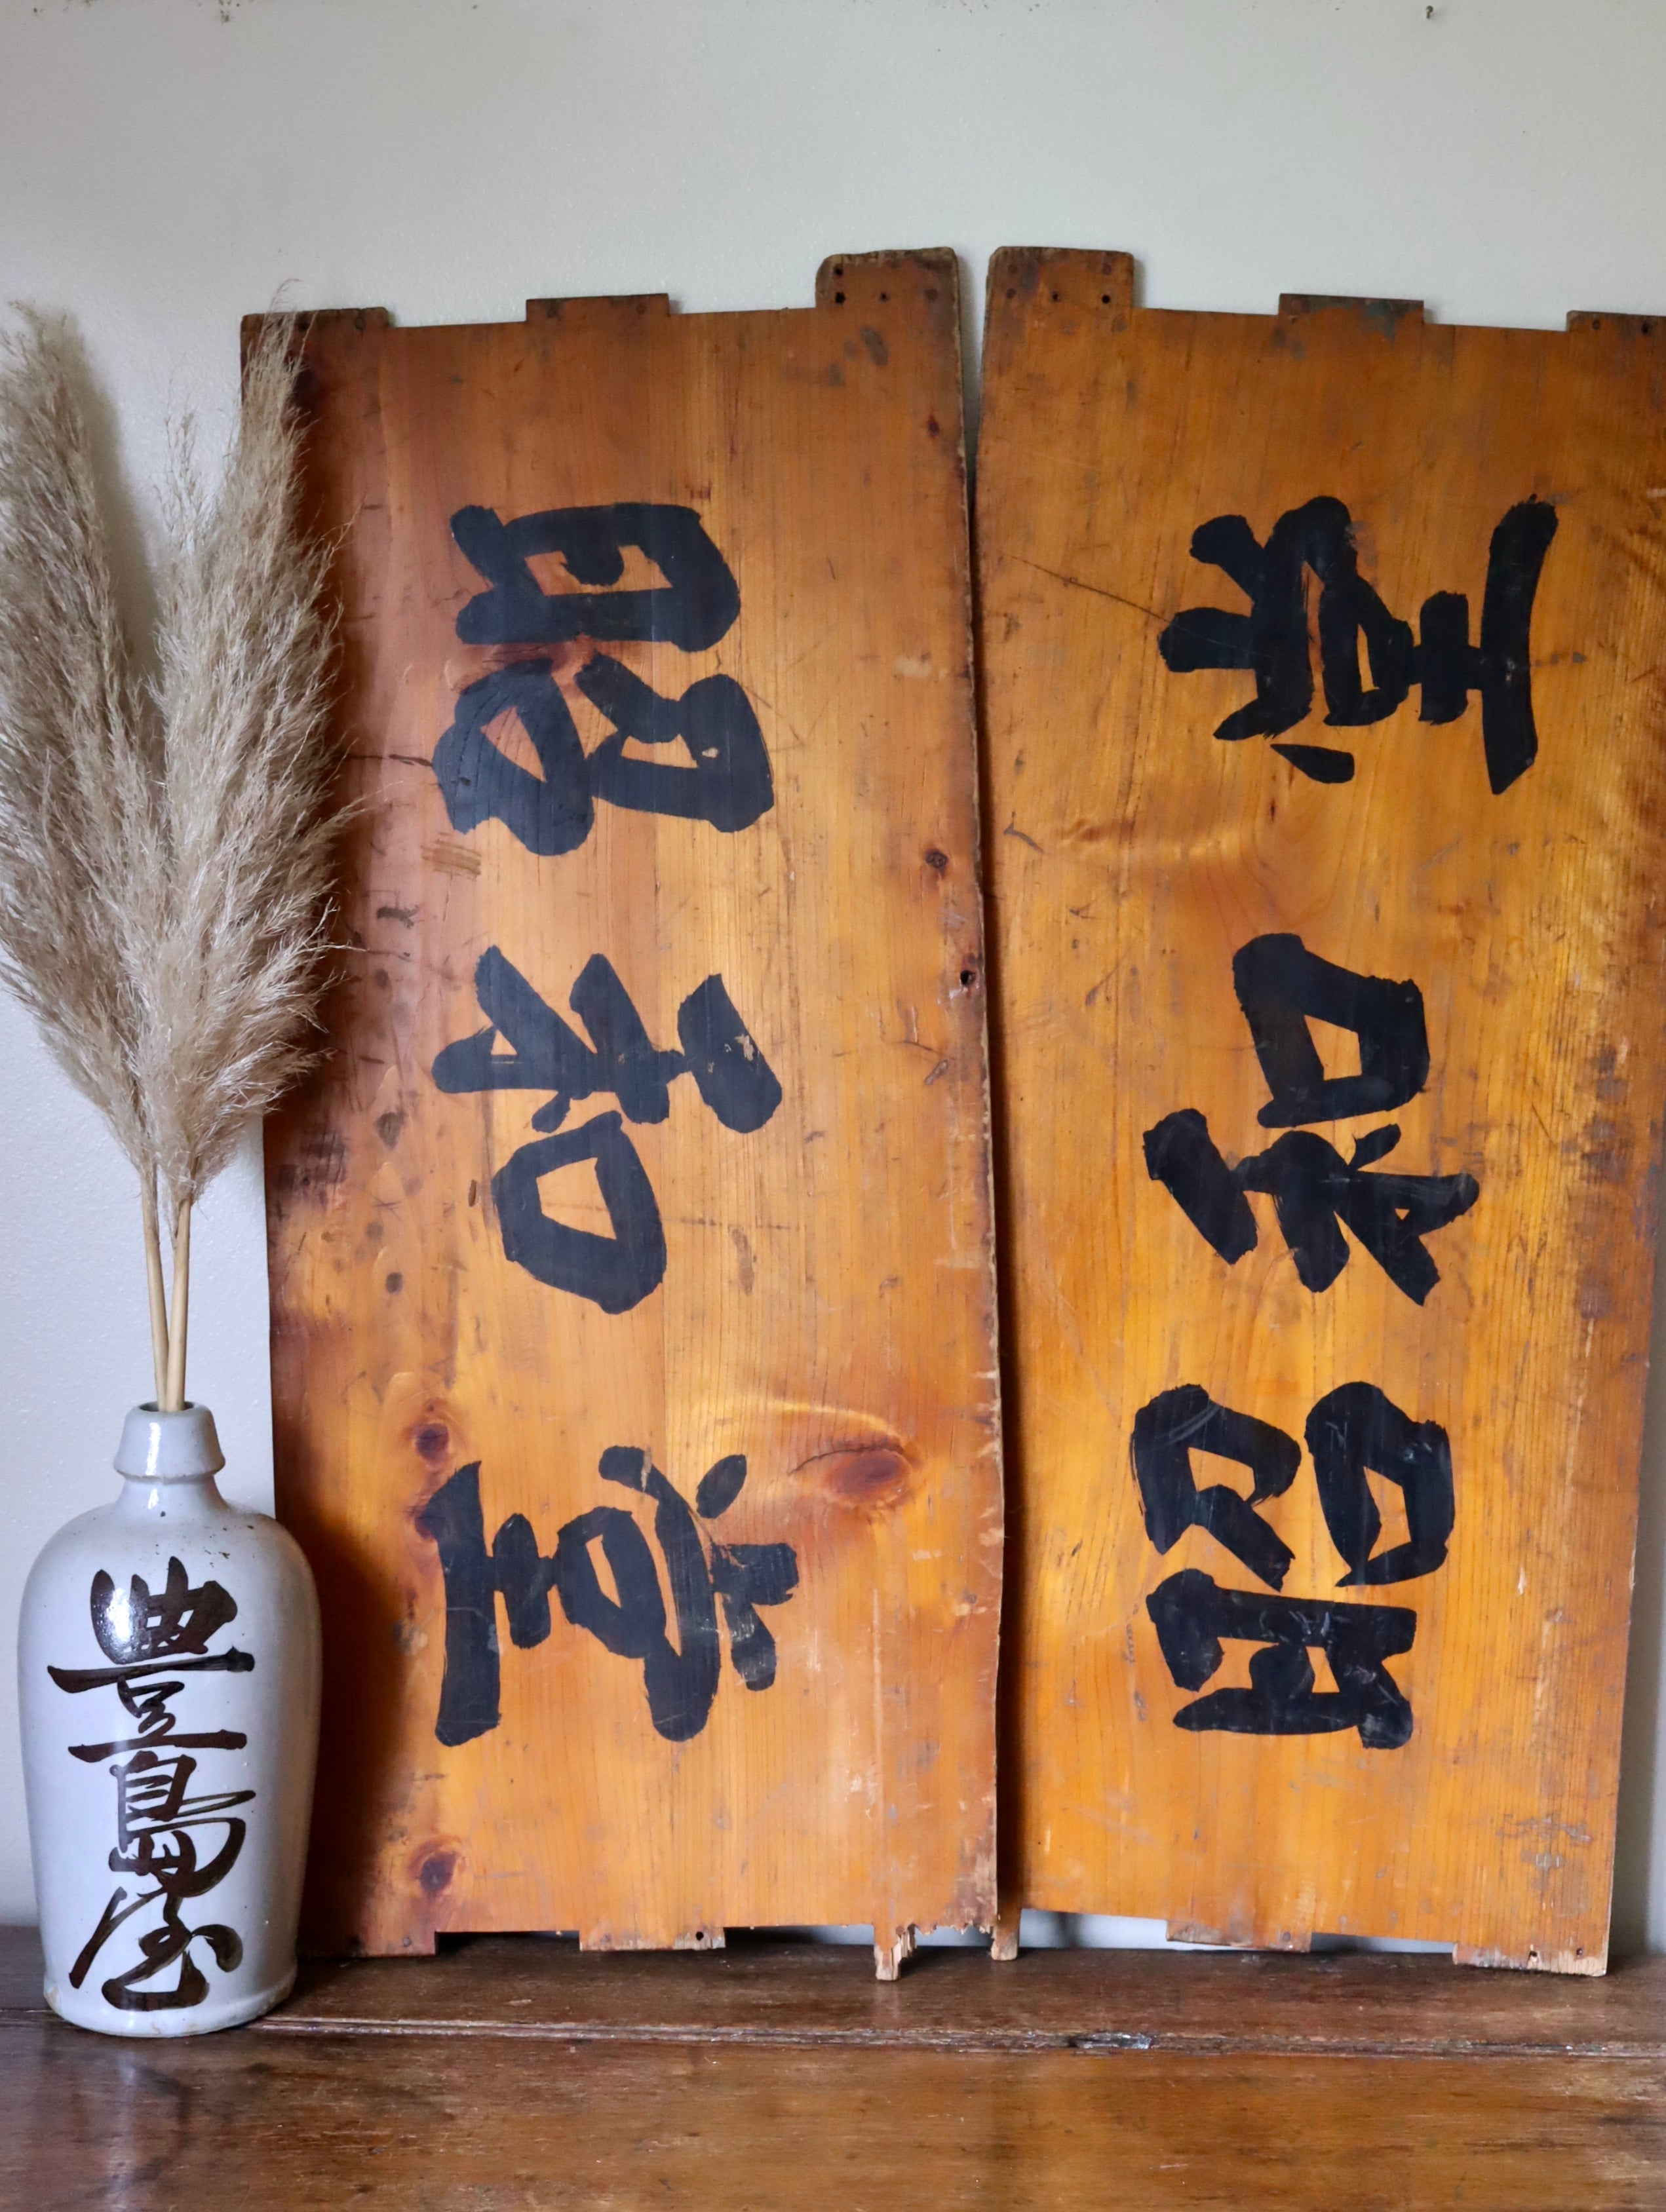 Antique Japanese Calligraphy Wooden Panels